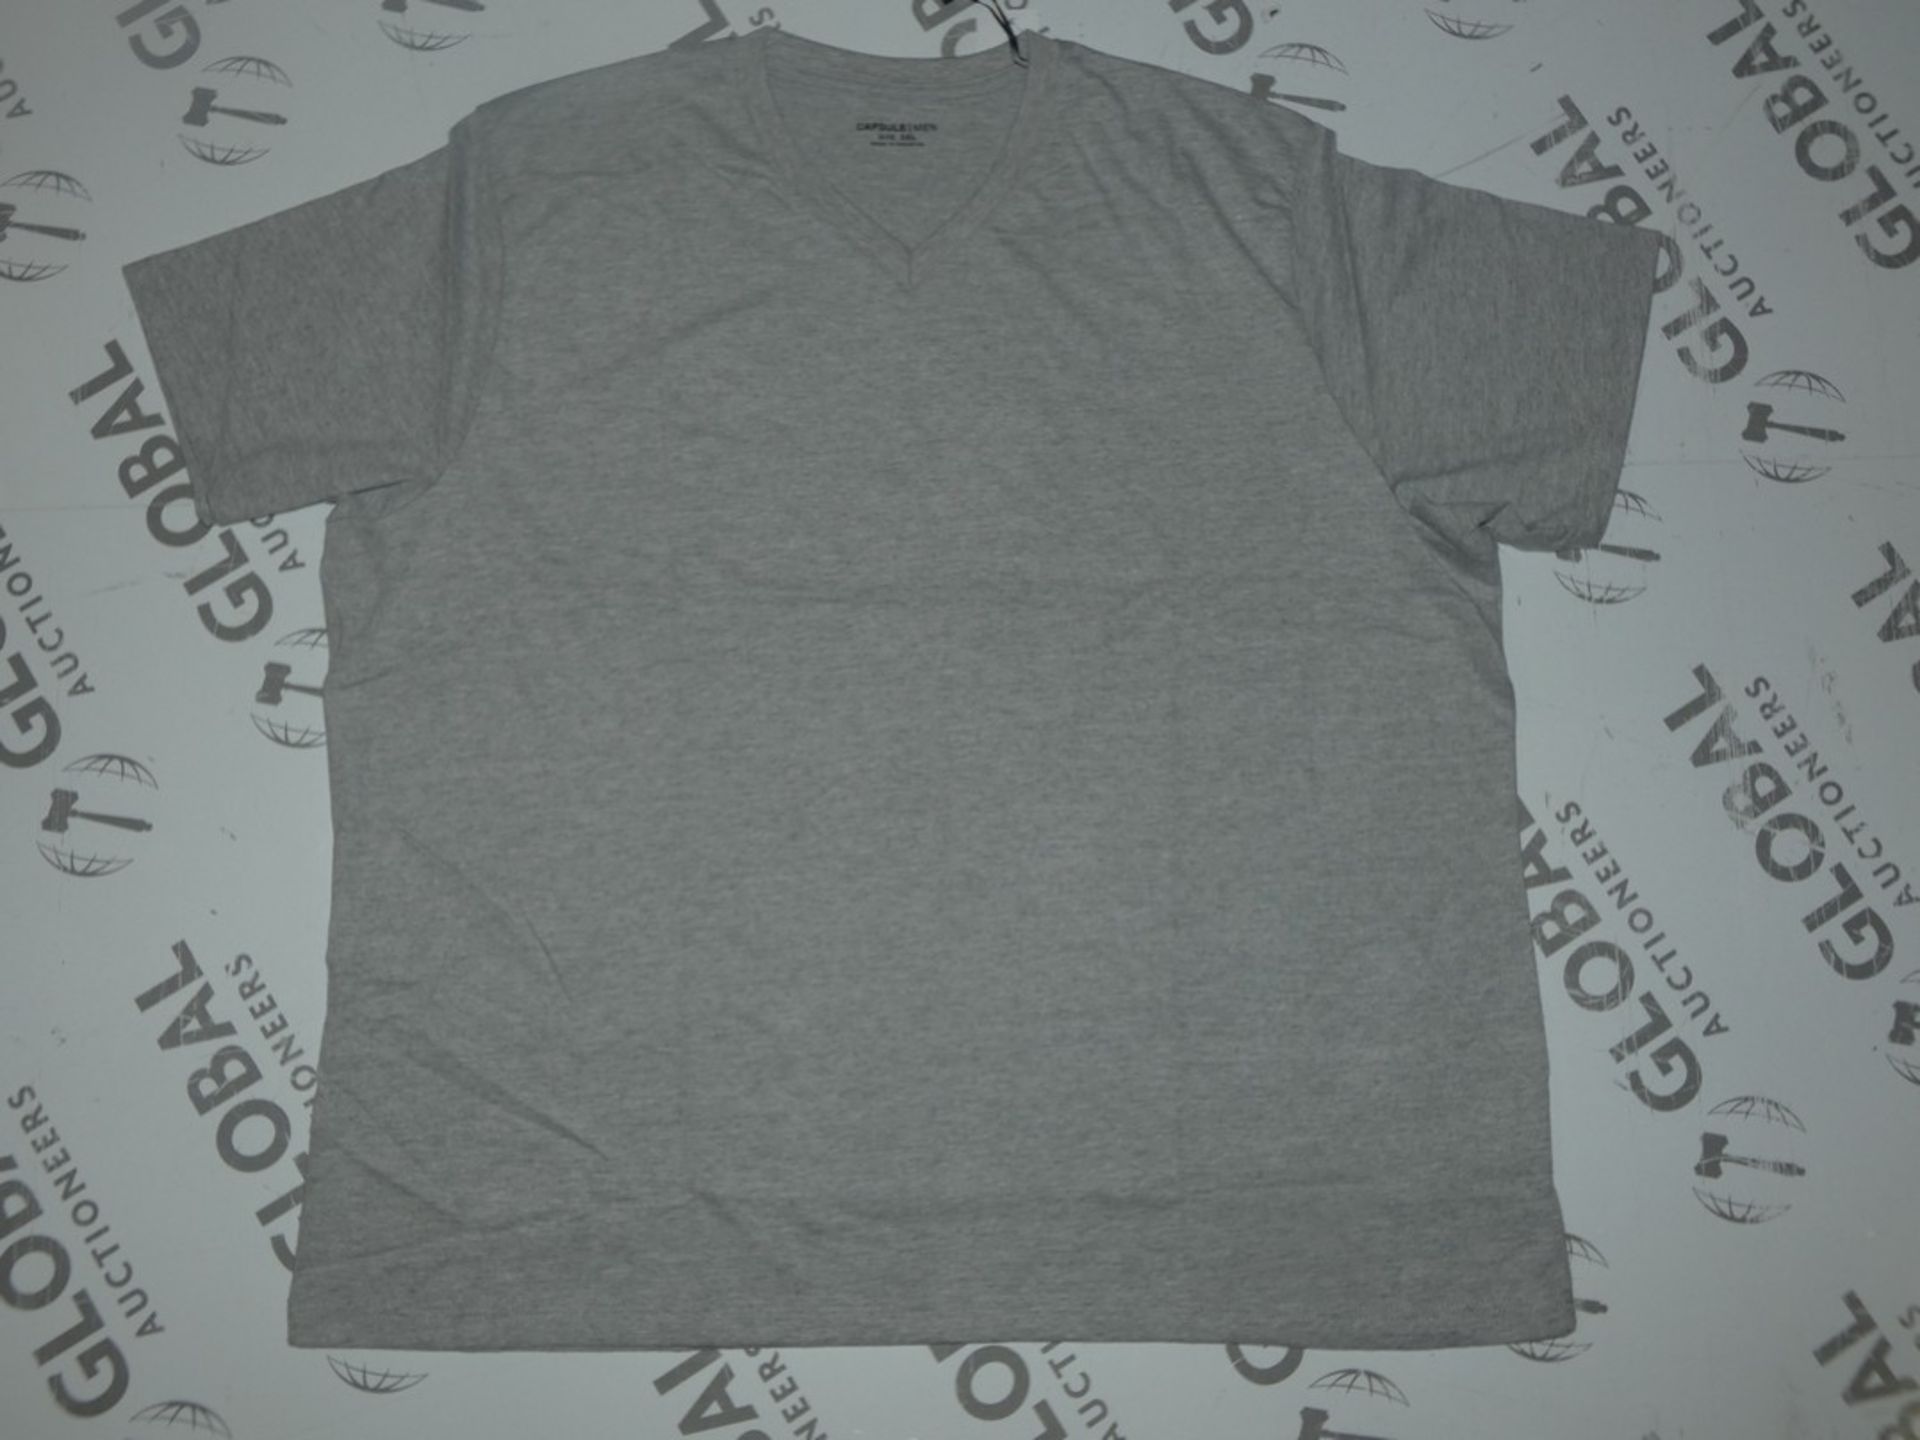 Lot to Contain 10 Brand New Capsule Men Grey V Neck T-Shirts Combined RRP £250 (£25 Each)